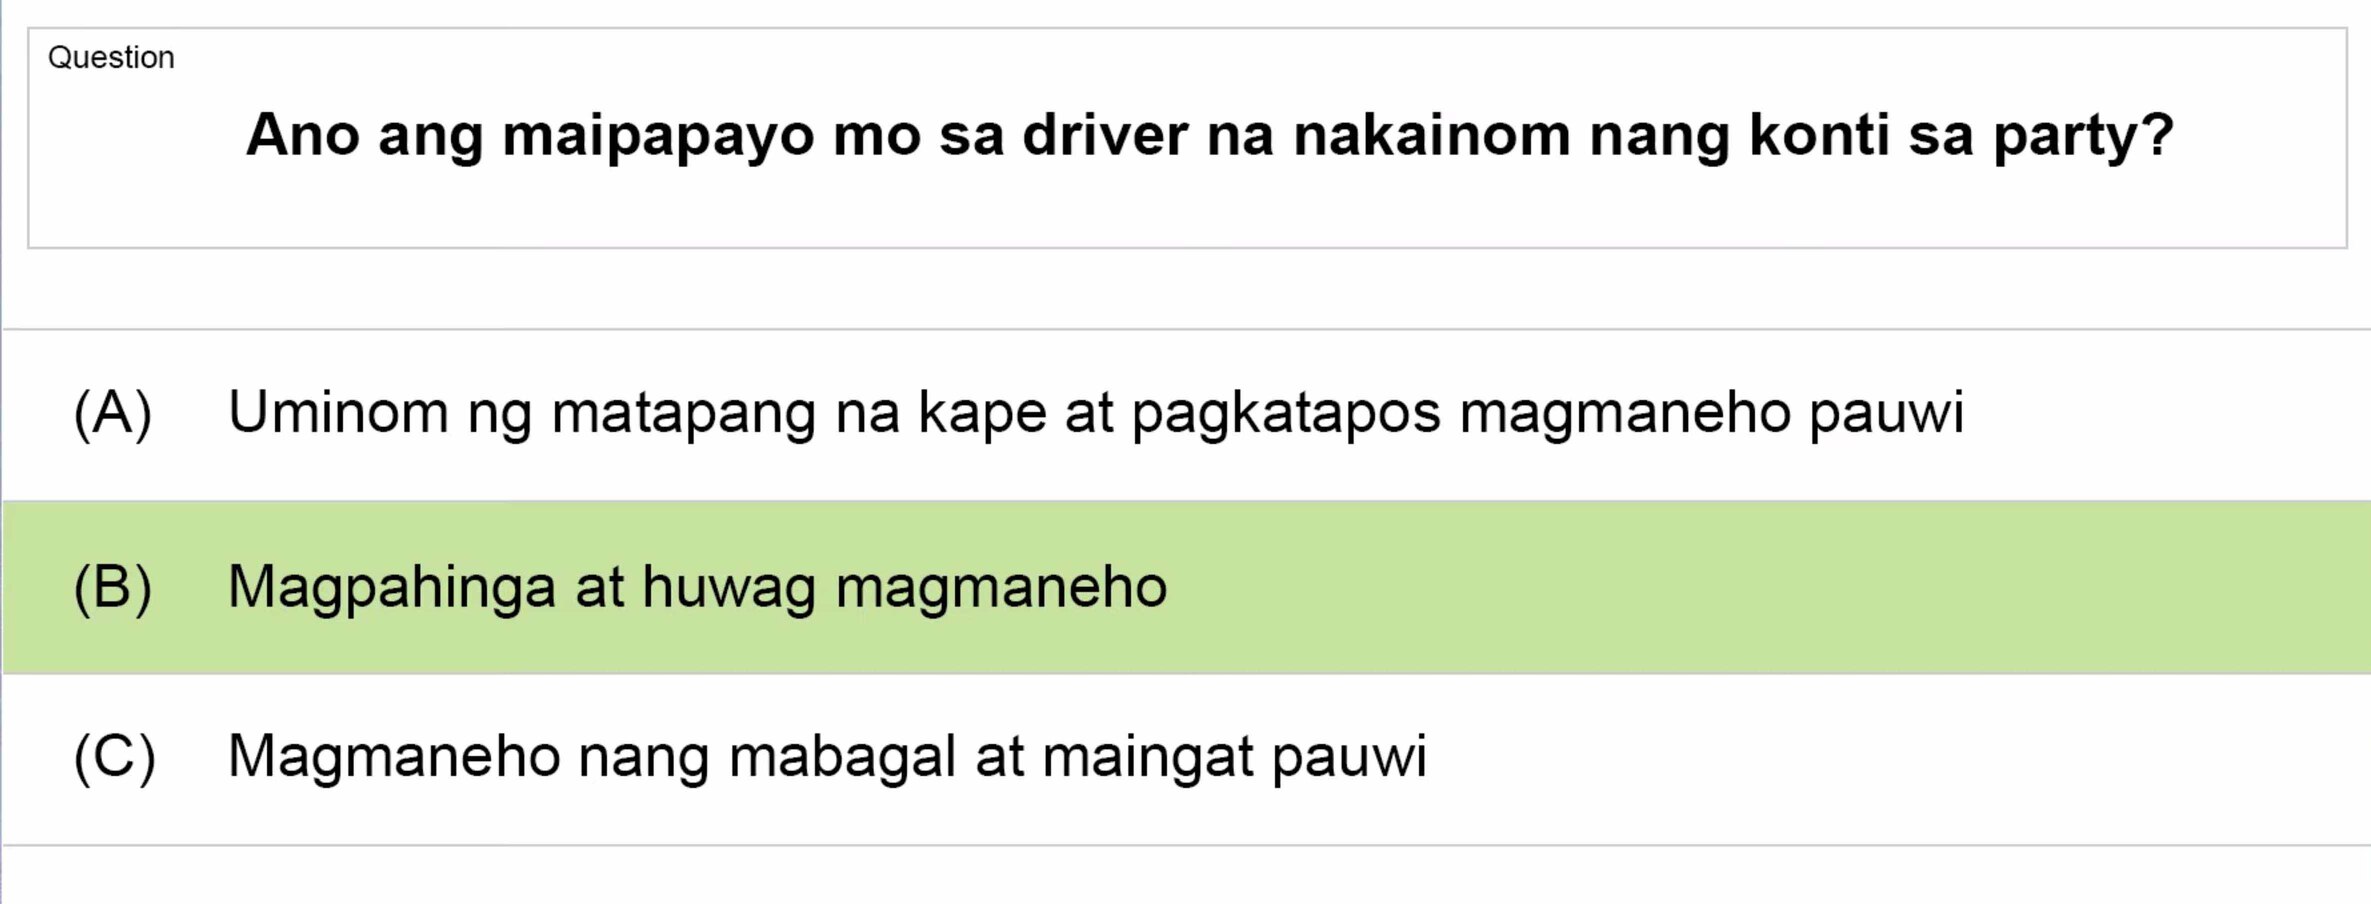 LTO Tagalog non professional exam reviewer light vehicle 3 (49)